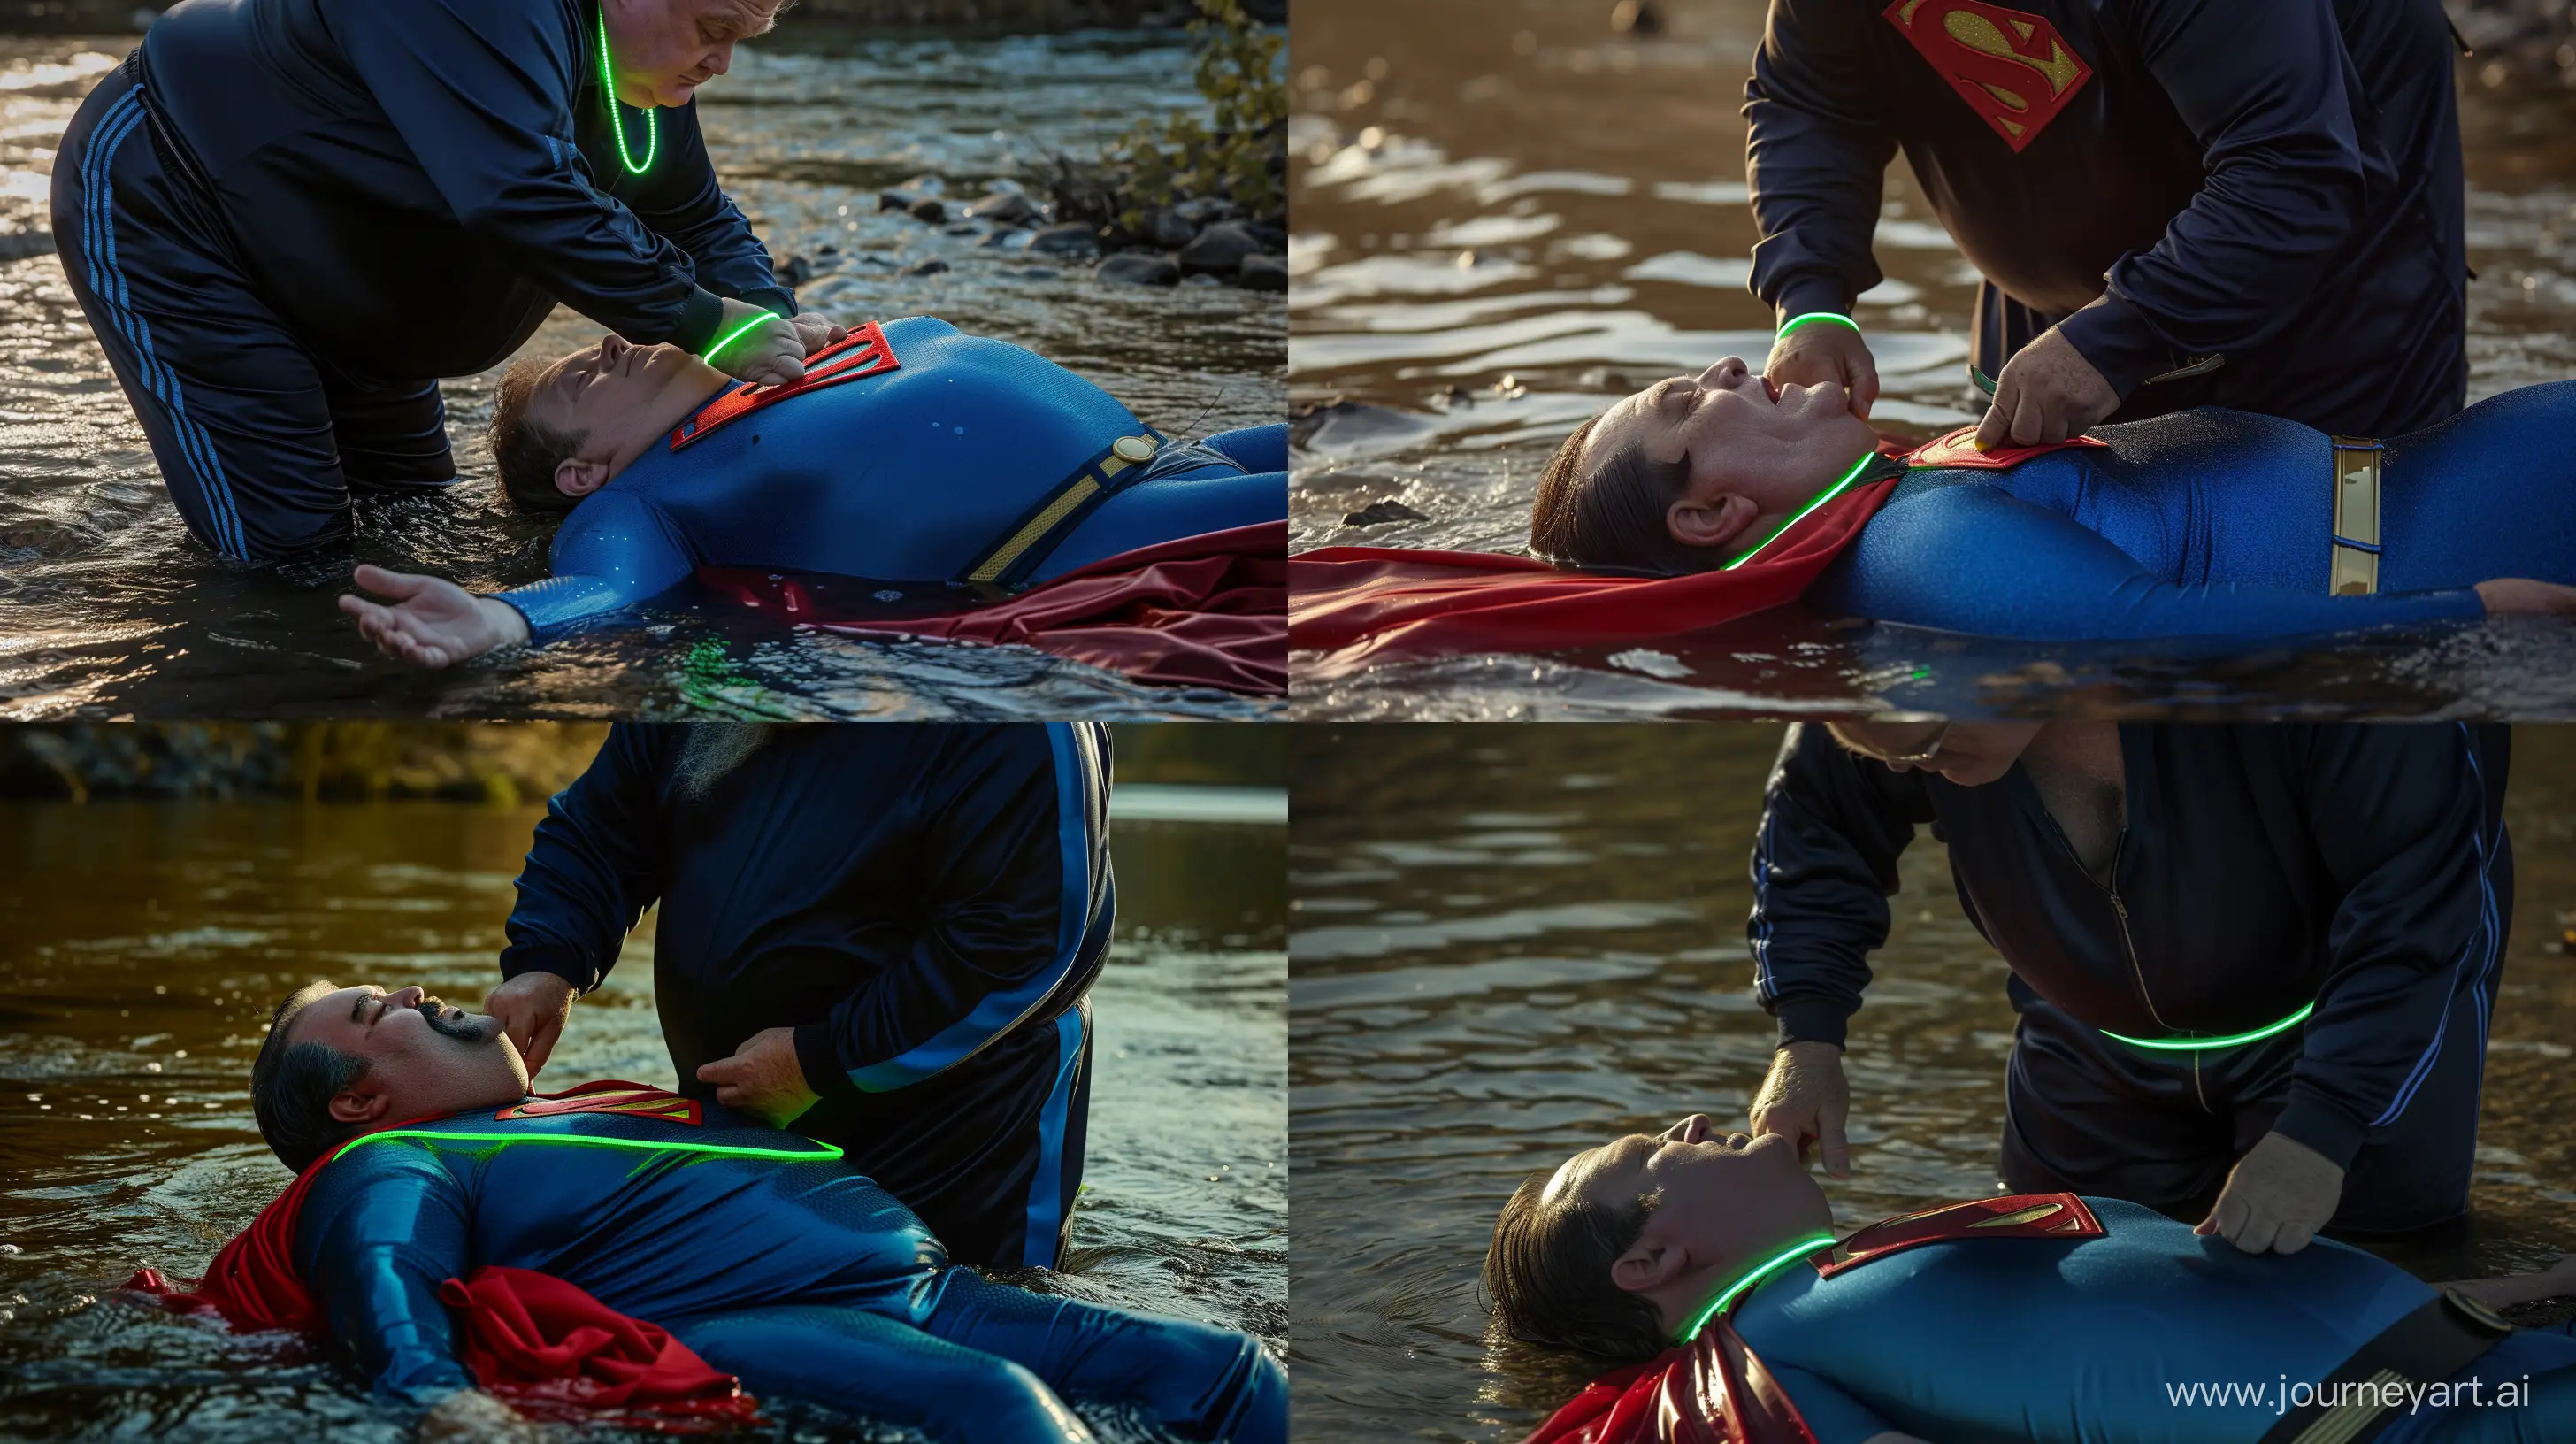 Close-up photo of a fat man aged 60 wearing a navy silk black tracksuit with a blue stripe on the pants. He is tightening a tight green glowing neon dog collar on the neck of a fat man aged 60 wearing a tight blue 1978 smooth superman costume with a red cape lying in the water. Natural Light. River. --style raw --ar 16:9